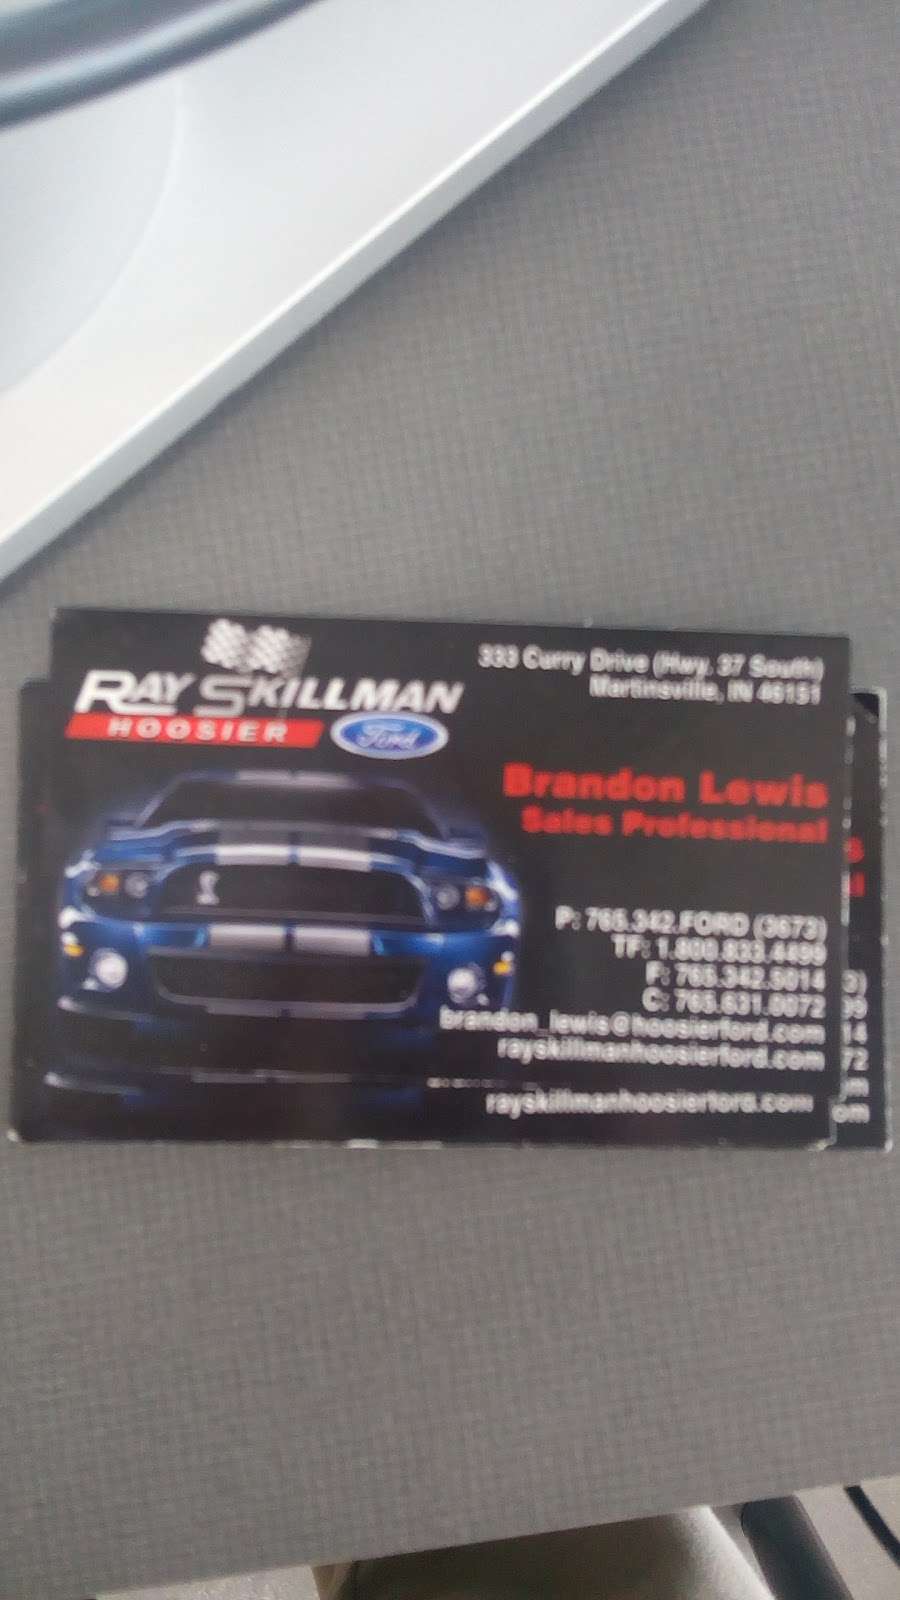 Ray Skillman Hoosier Ford | 333 Robert Curry Dr, Martinsville, IN 46151 | Phone: (765) 342-3673